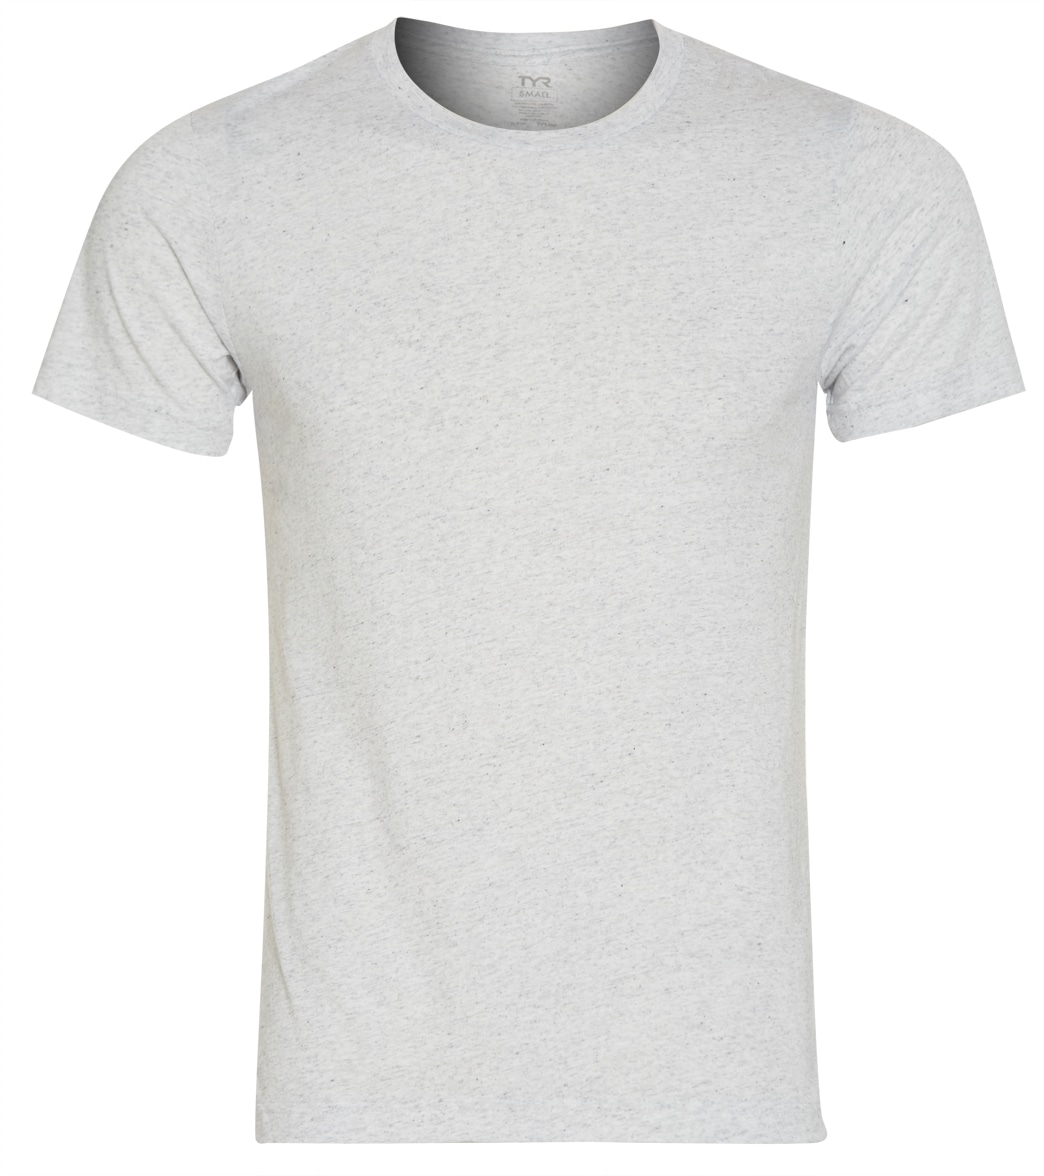 TYR Unisex Triblend Tee Shirt - White Heather Large Cotton/Polyester - Swimoutlet.com